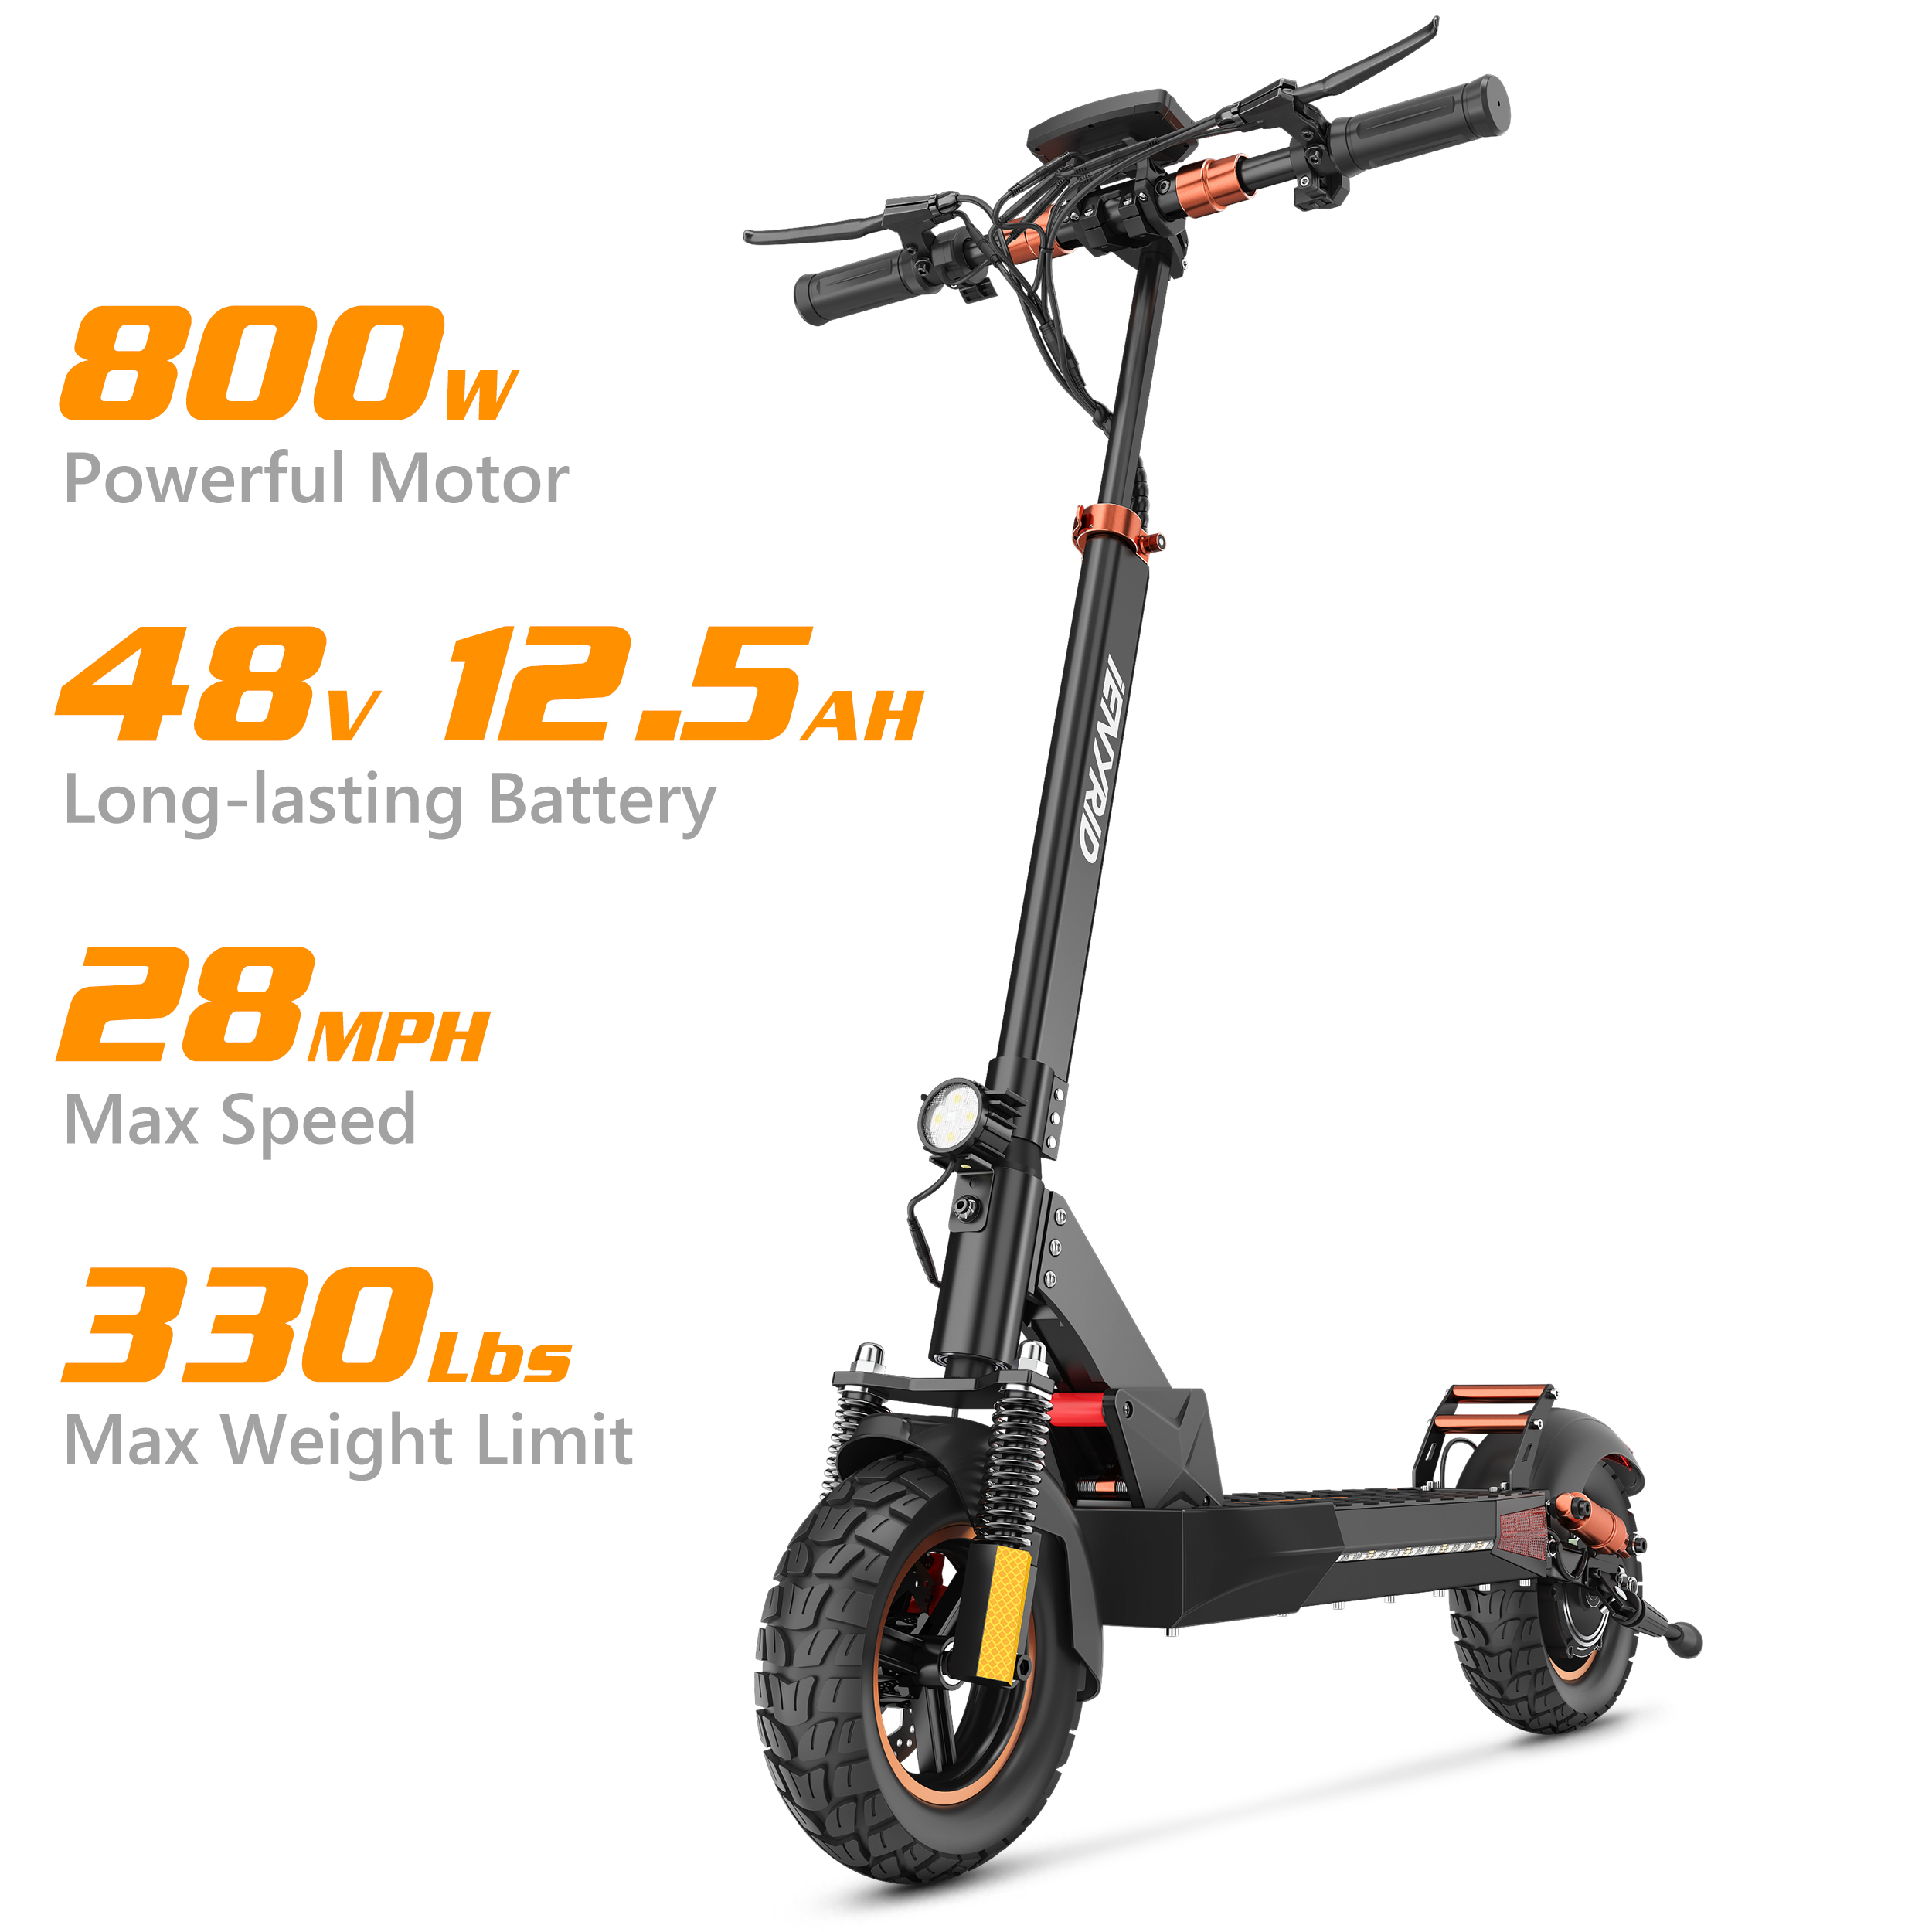 iENYRID 800W Electric Scooter for Adults Teenagers with Removable Seat, 10" Off-road Pneumatic Tires, 3 Speeds 28 MPH Max, Coded Lock Folding Electric Scooter 330lbs Weight Limit Black - image 3 of 10